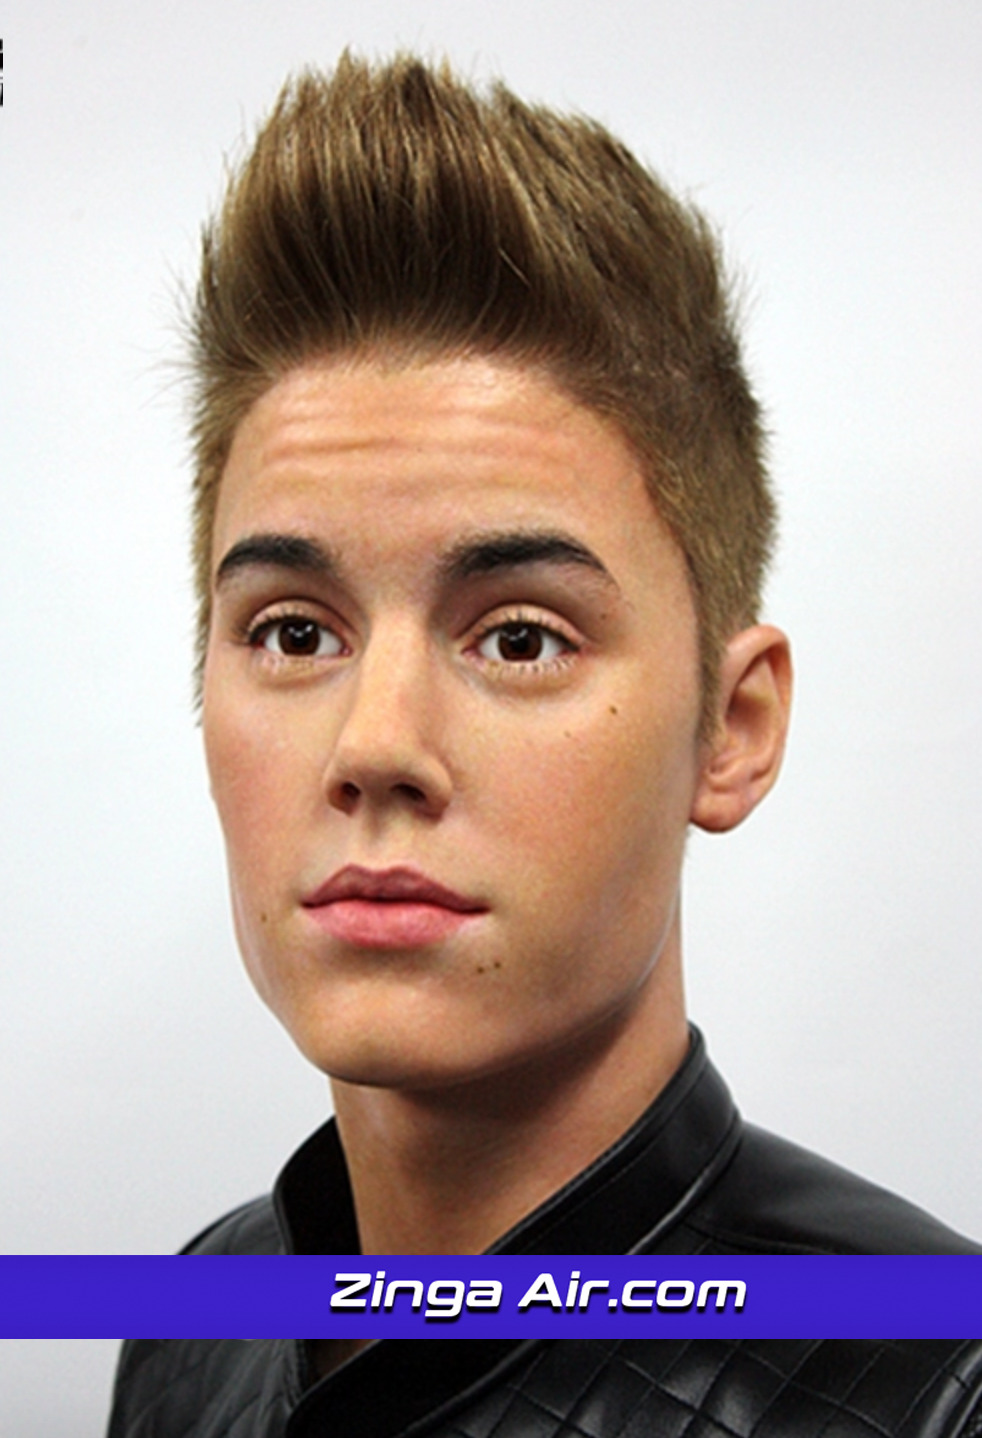 Life Size Justin Bieber Music Singer Wax Resin Statue Realistic Prop Display 1:1